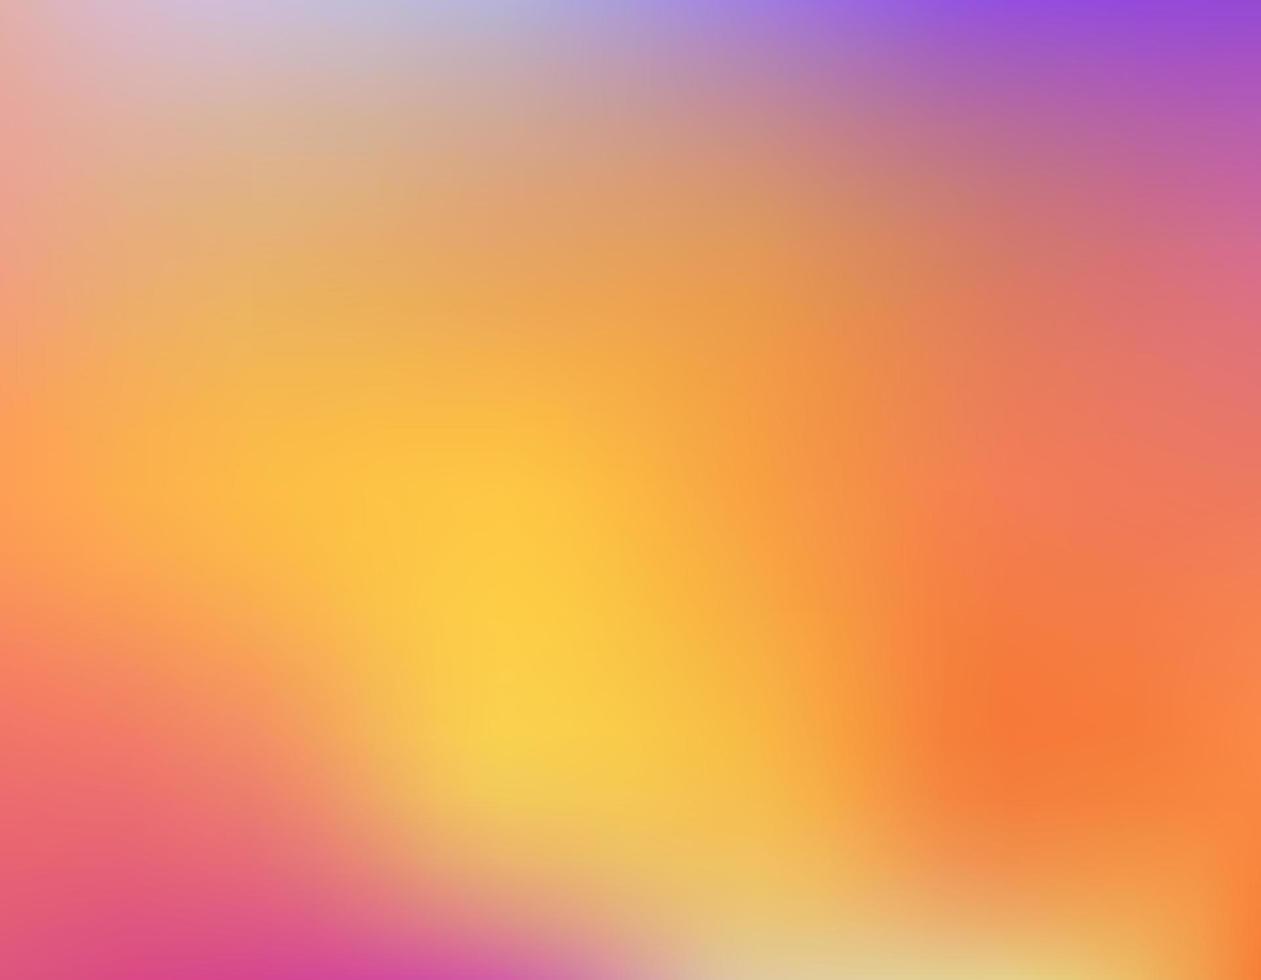 Abstract colorful smooth blurred vector background for design